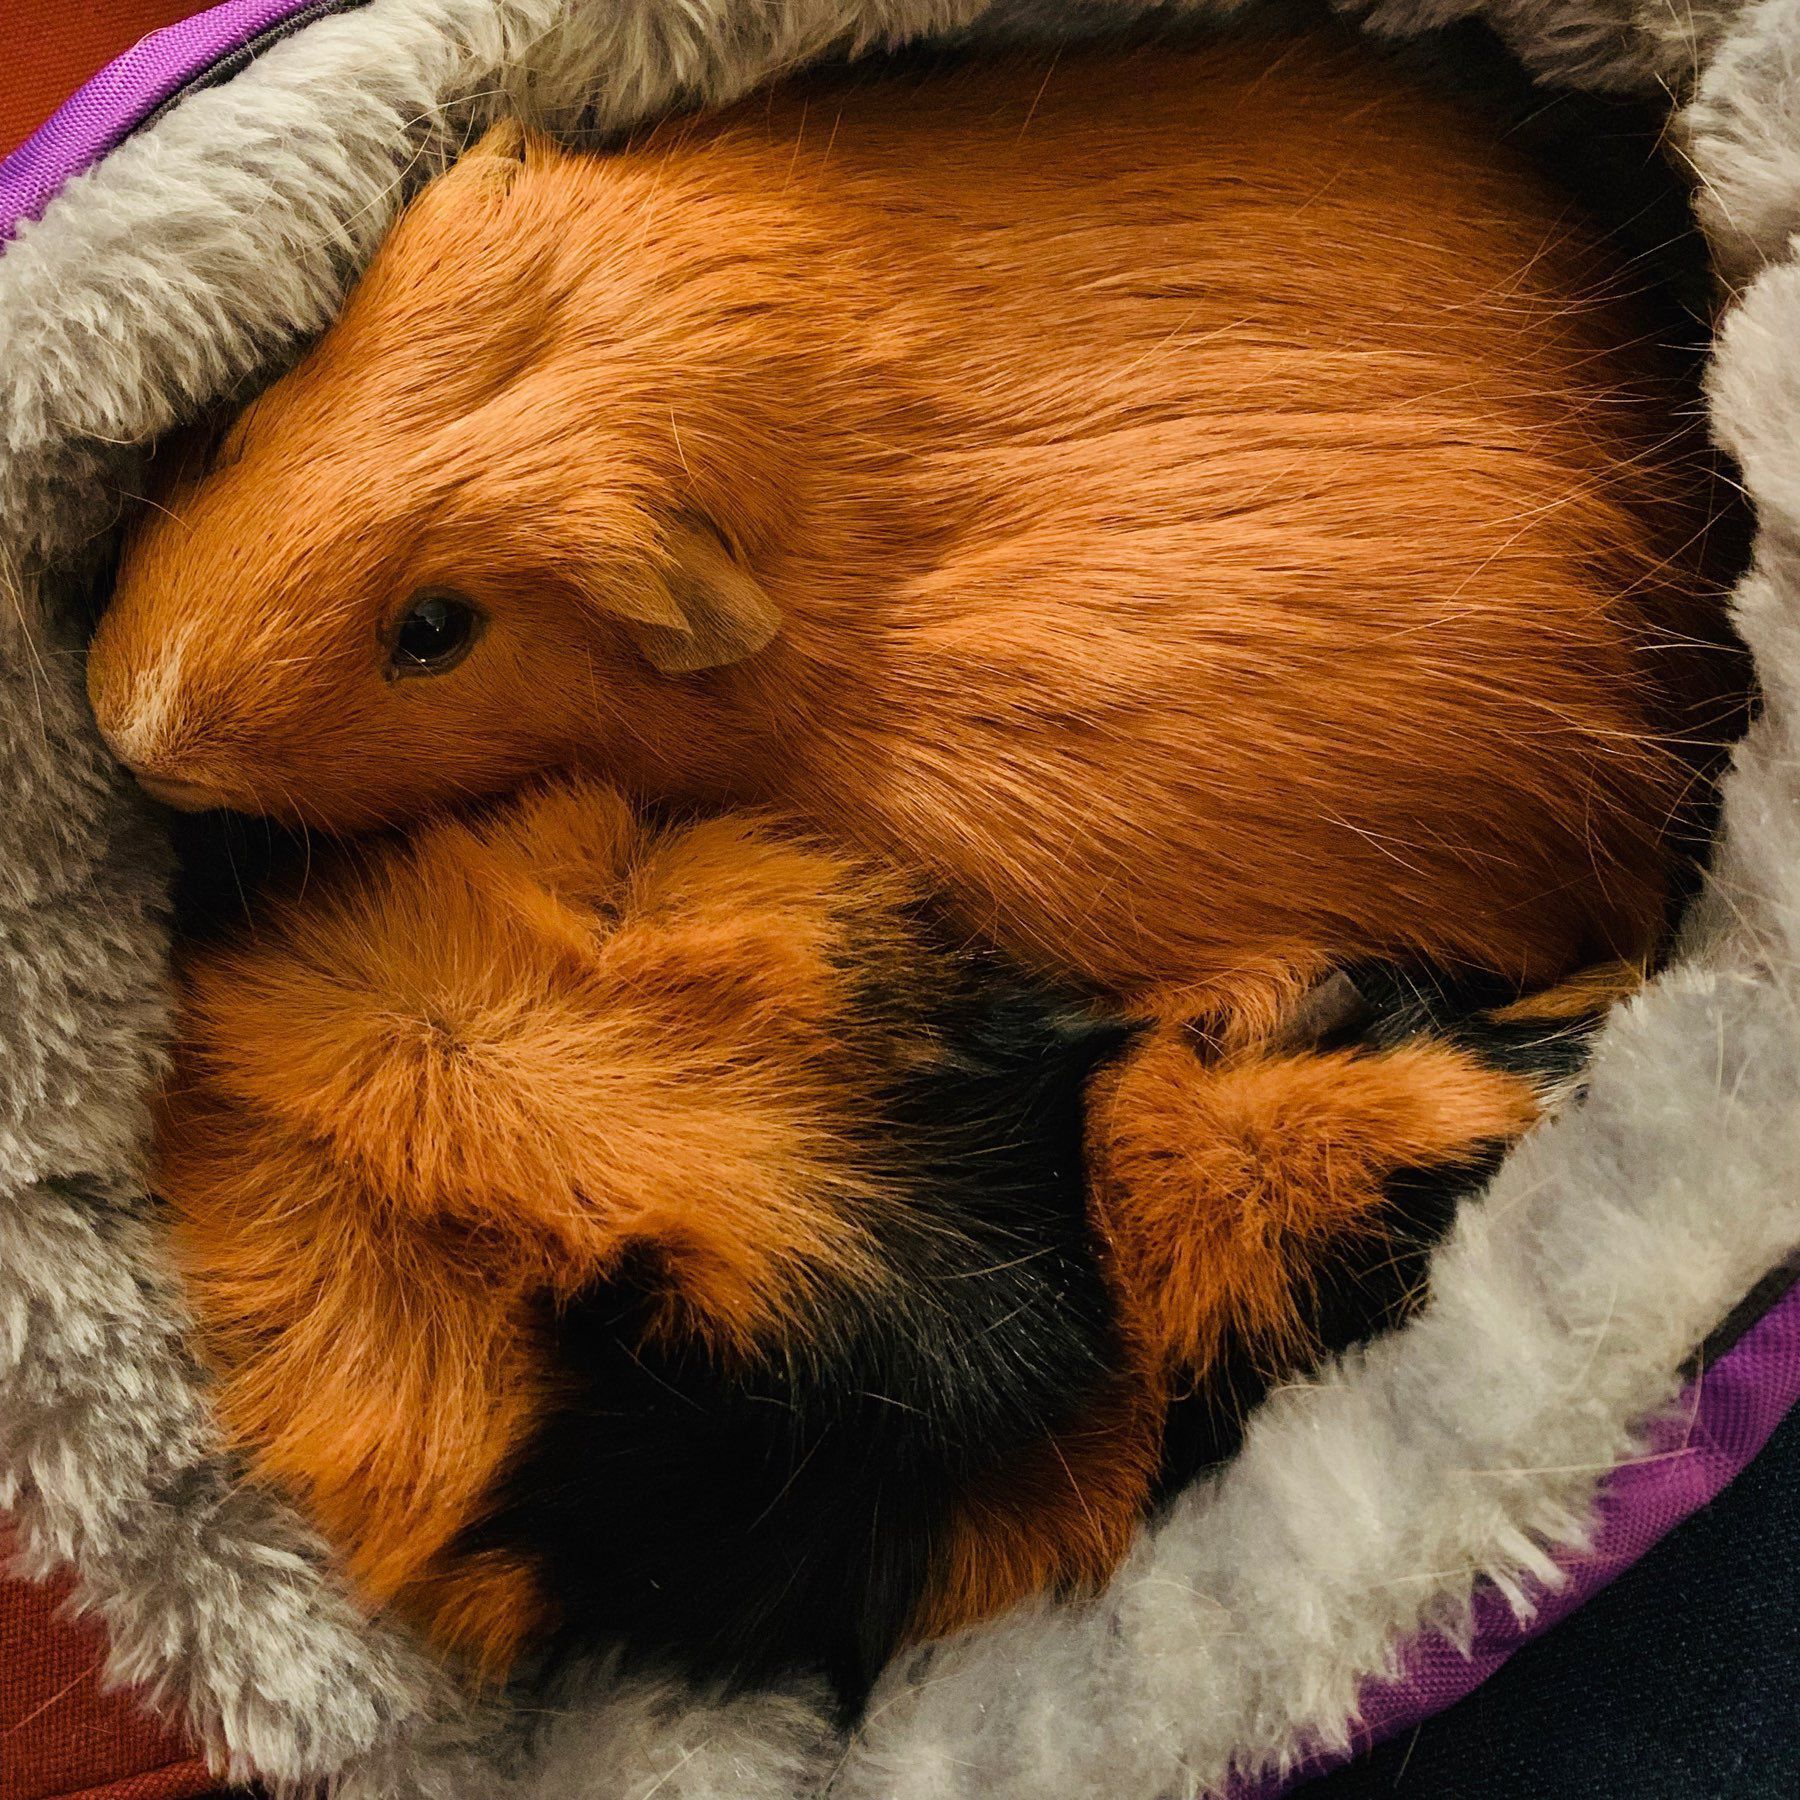 two guinea pigs in a fluffy bed.